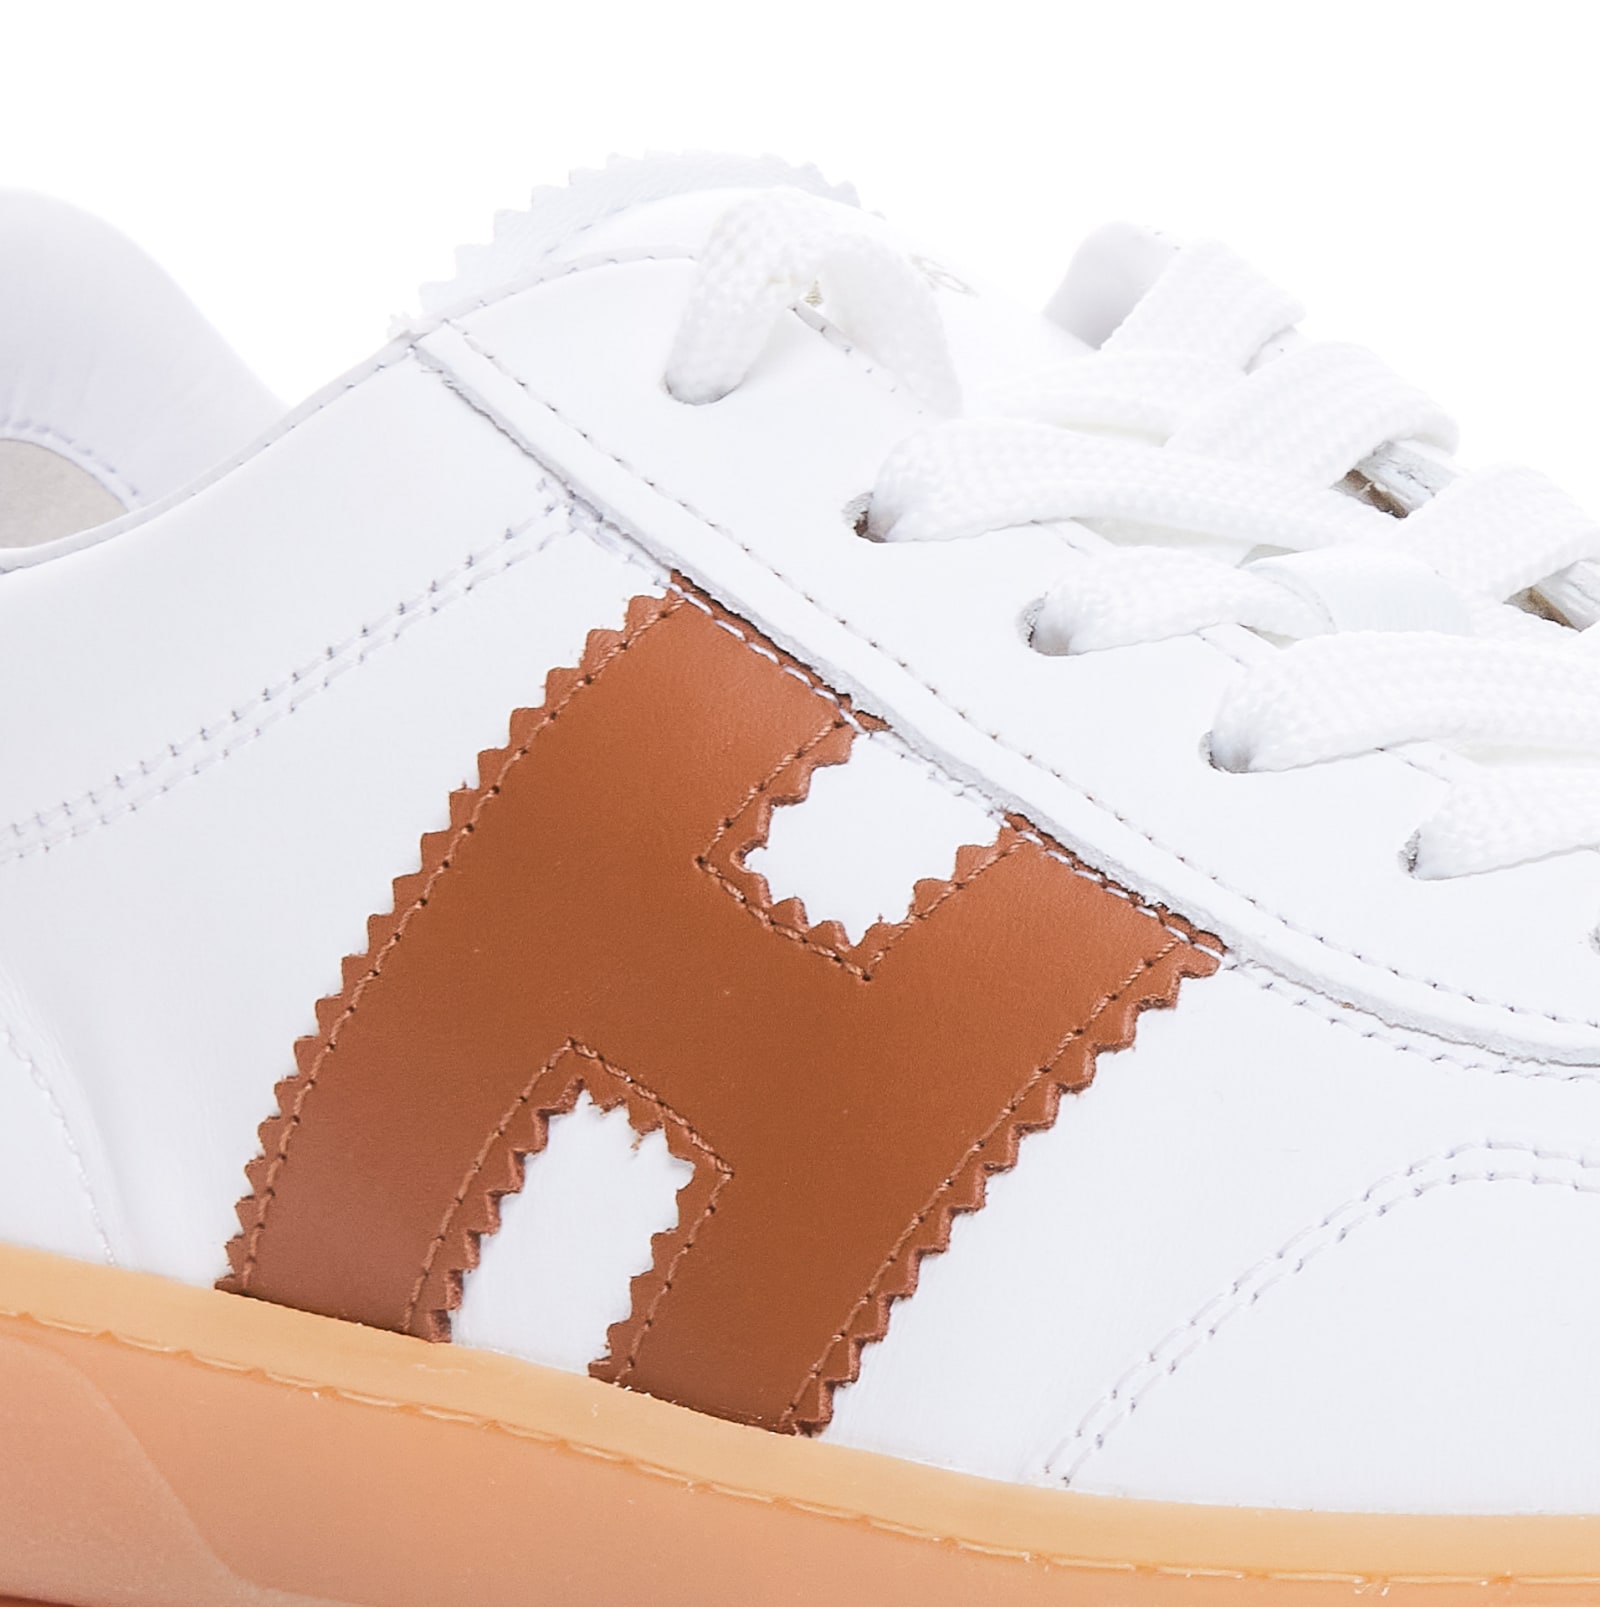 Shop Hogan Cool Sneakers In Bianco Cuoio